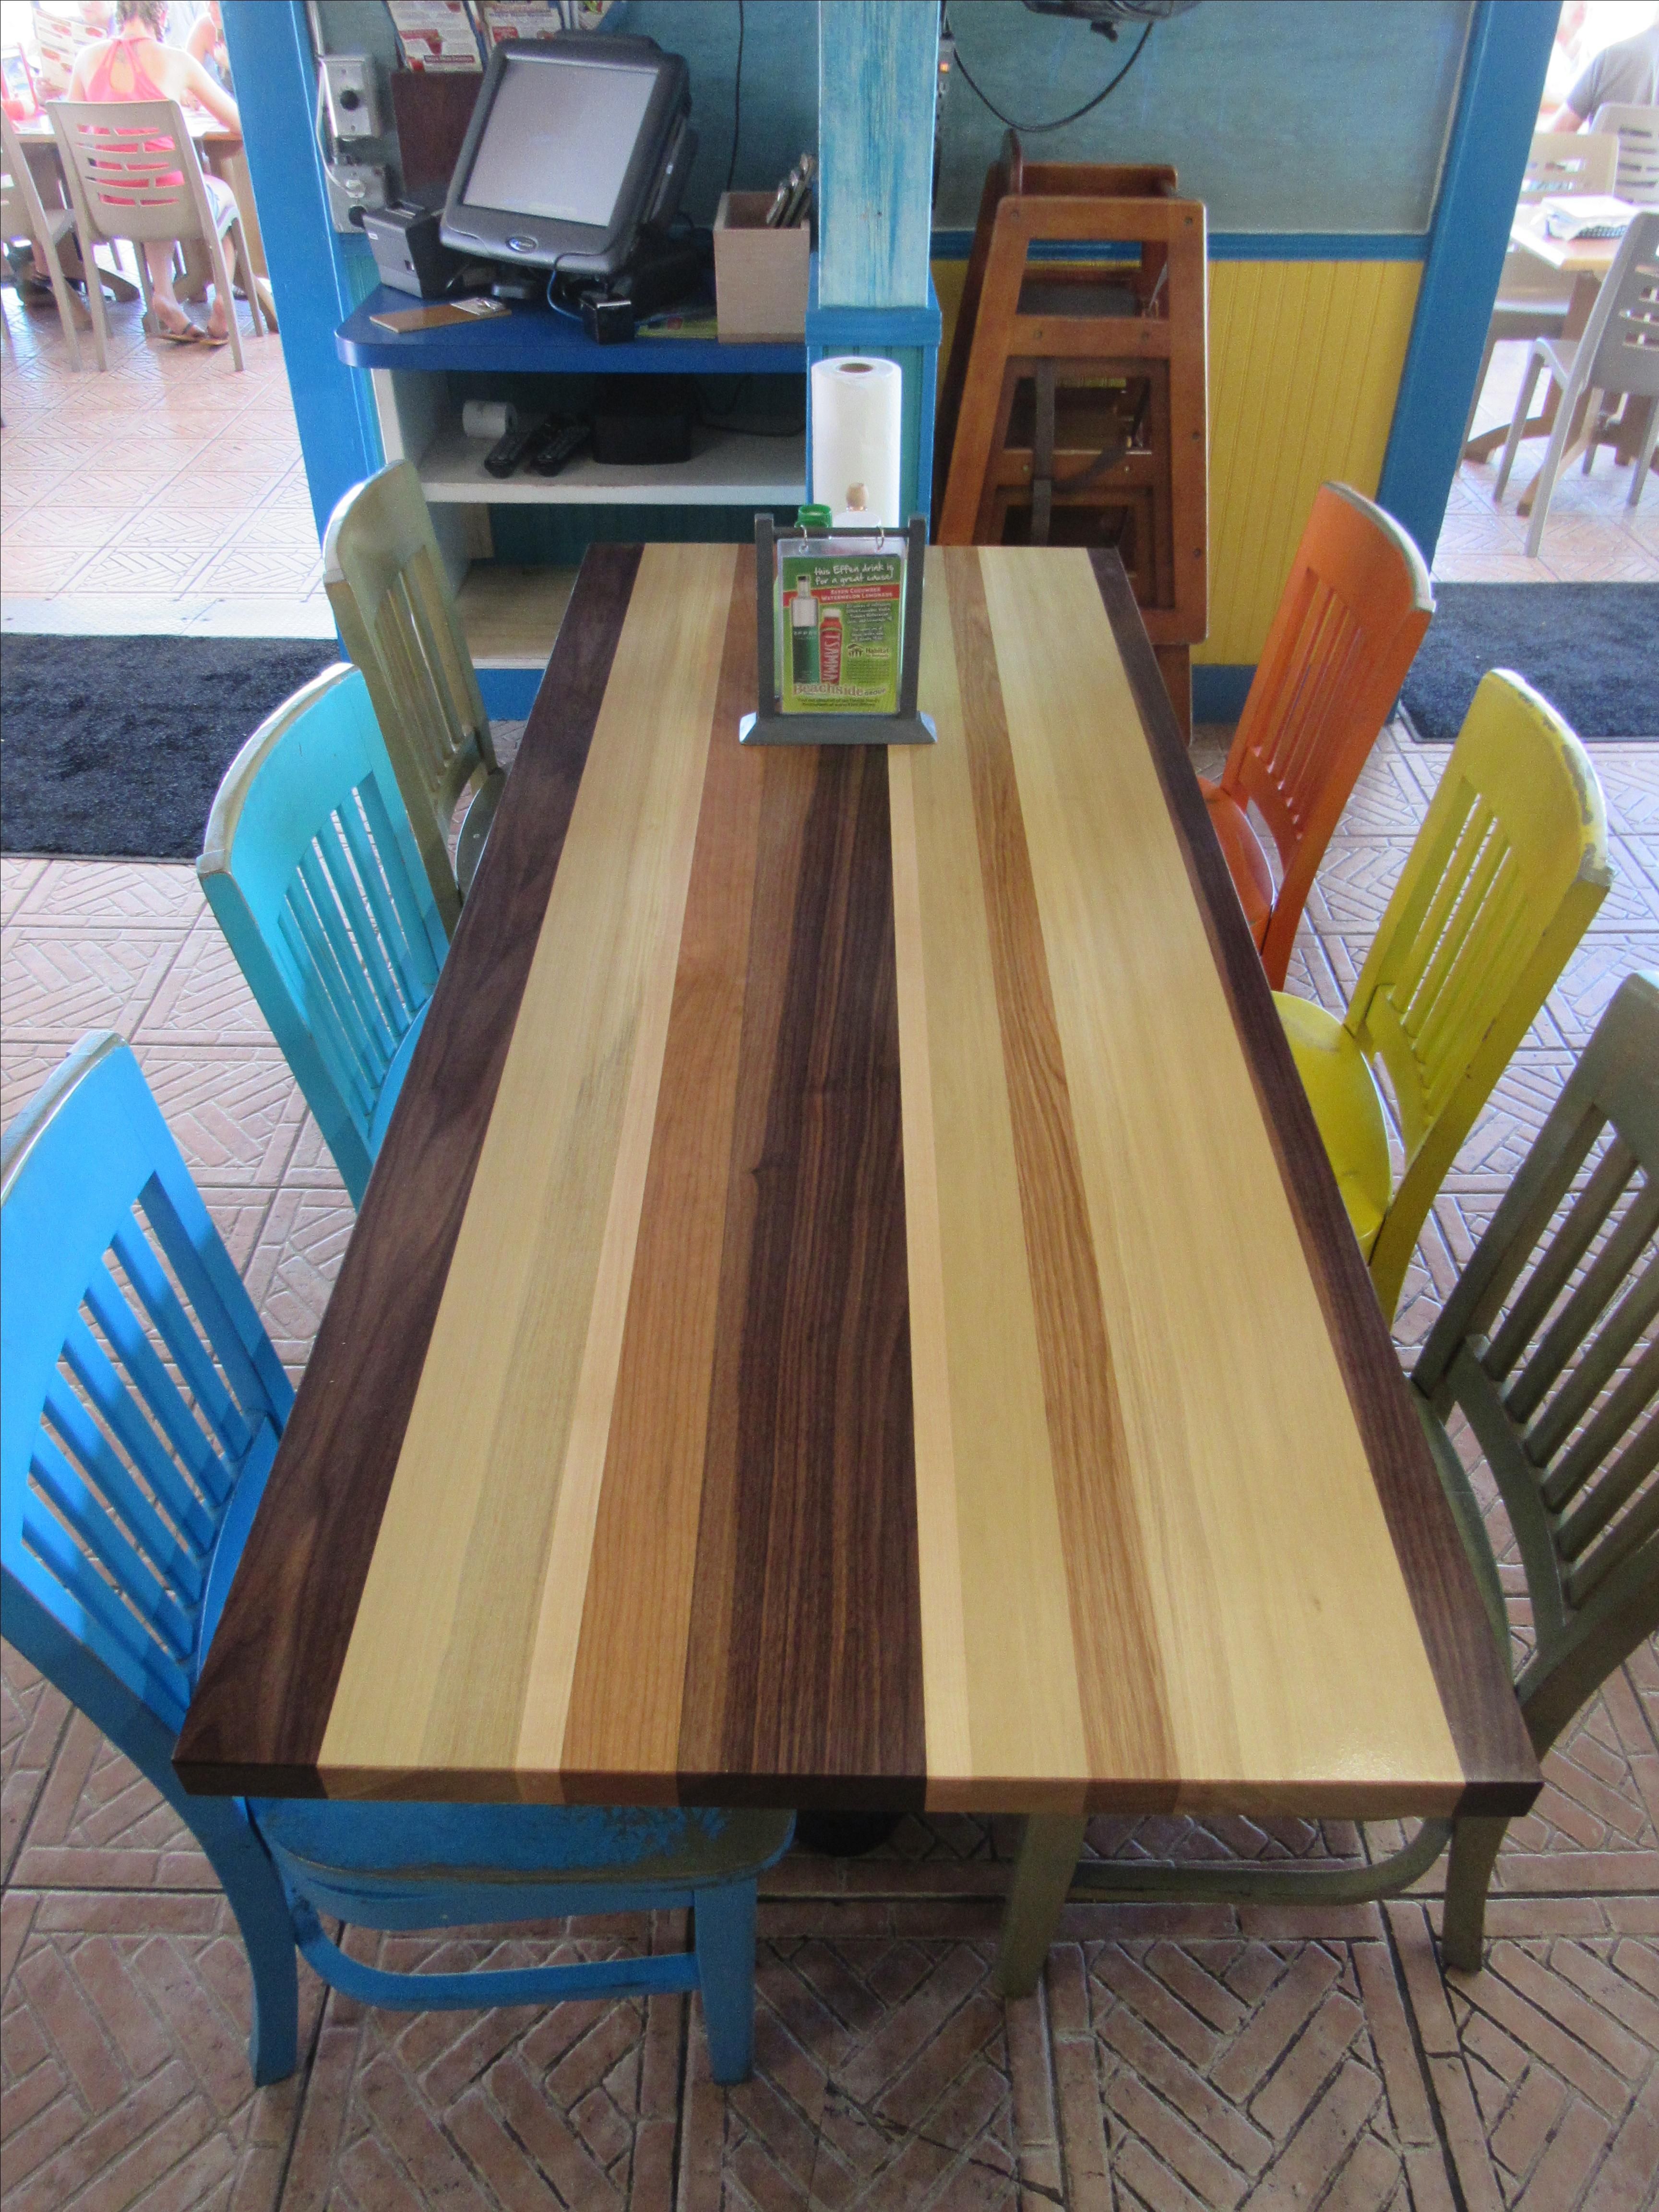 Hand Crafted Custom Multi-Species, Multi Color Table Tops, Solid American Hardwoods, Locally Sourced Locally Made by Hawk Eye Hand Crafts CustomMade .com